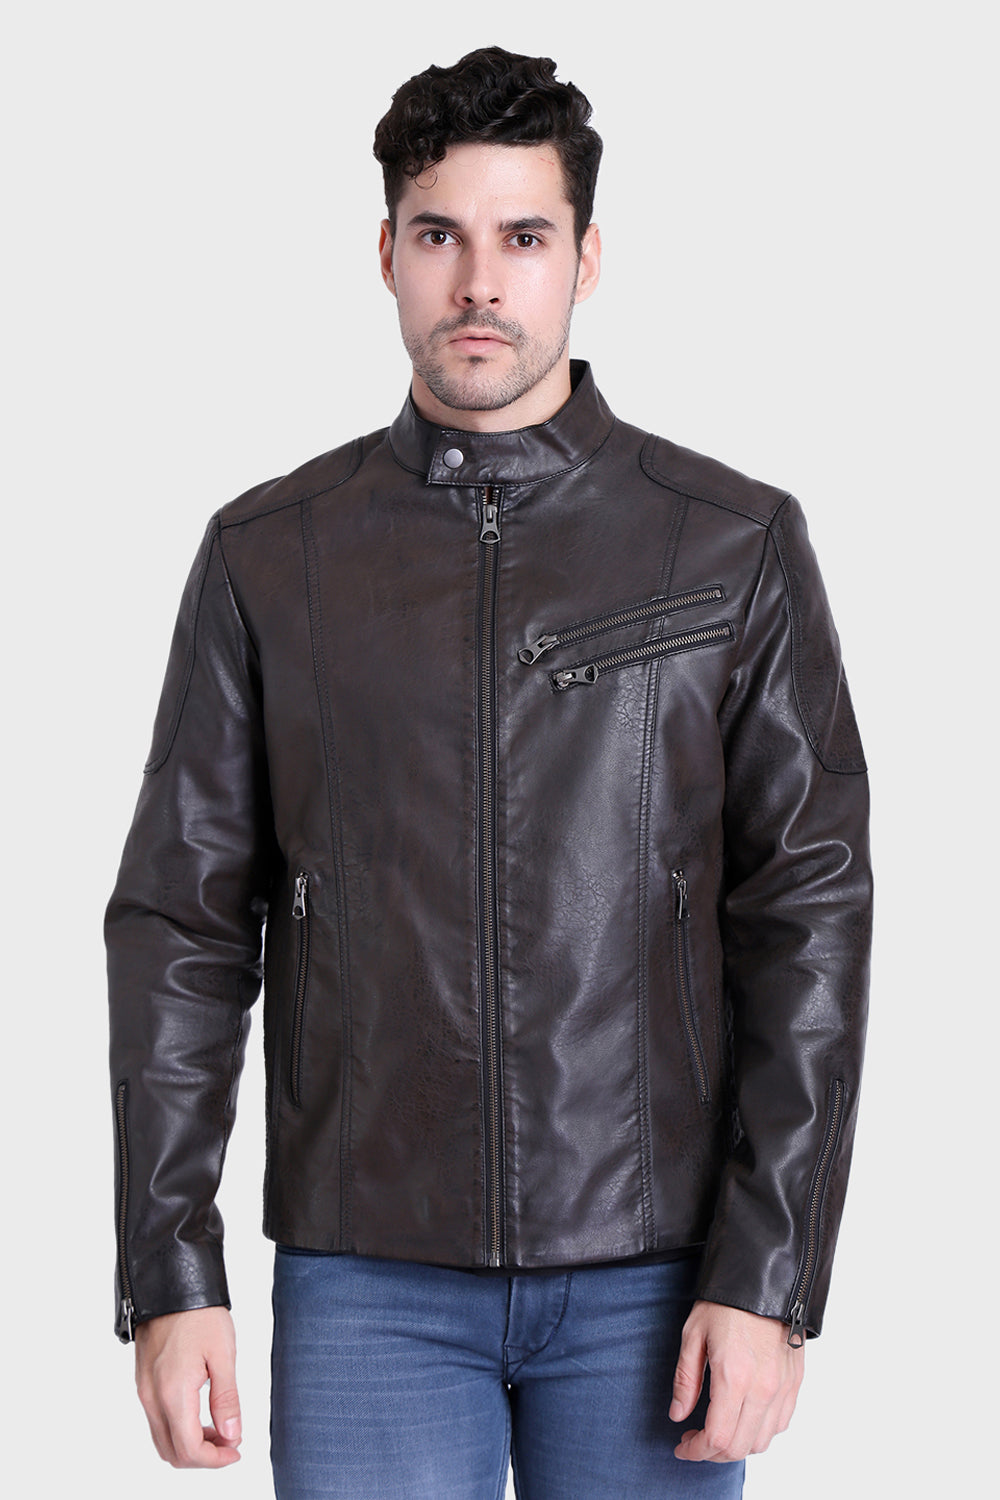 Justanned Caramel Double Zip Leather Jacket